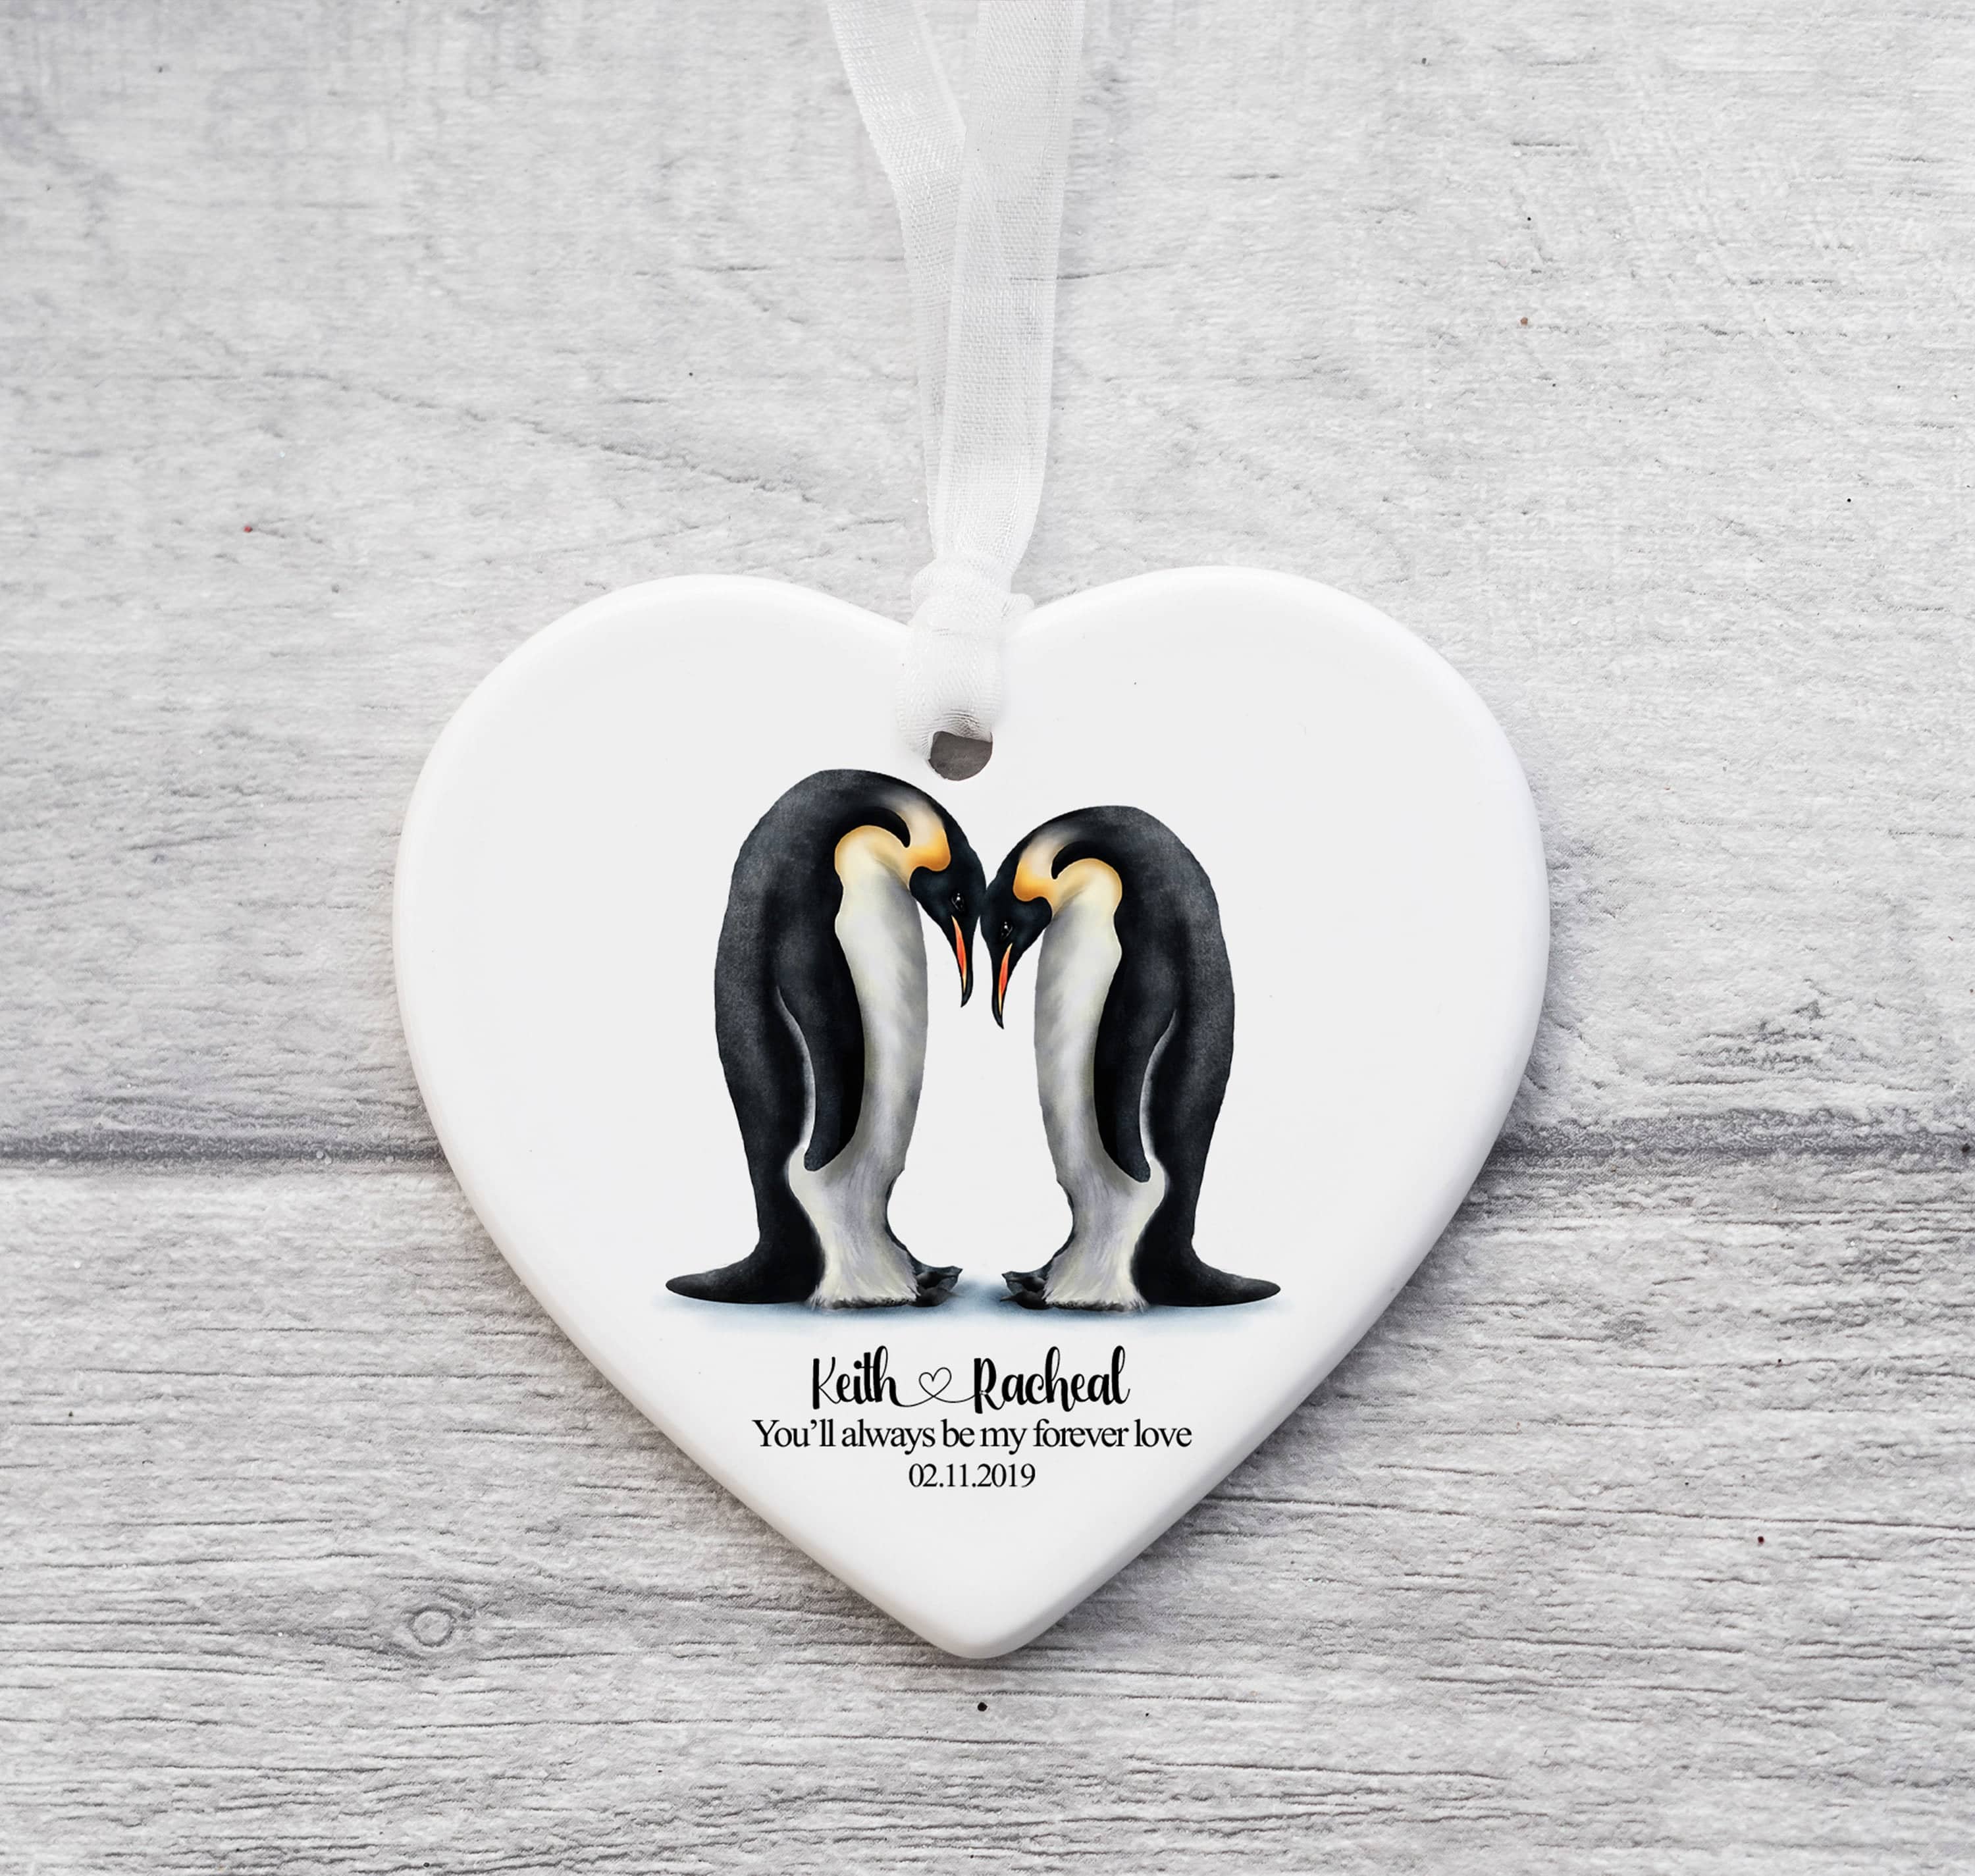 Penguin Gifts, One Year Anniversary Gift, Engagement Gifts, Gifts for Boyfriend, Girlfriend, Husband Wife Couples Wedding Gift Ceramic Heart